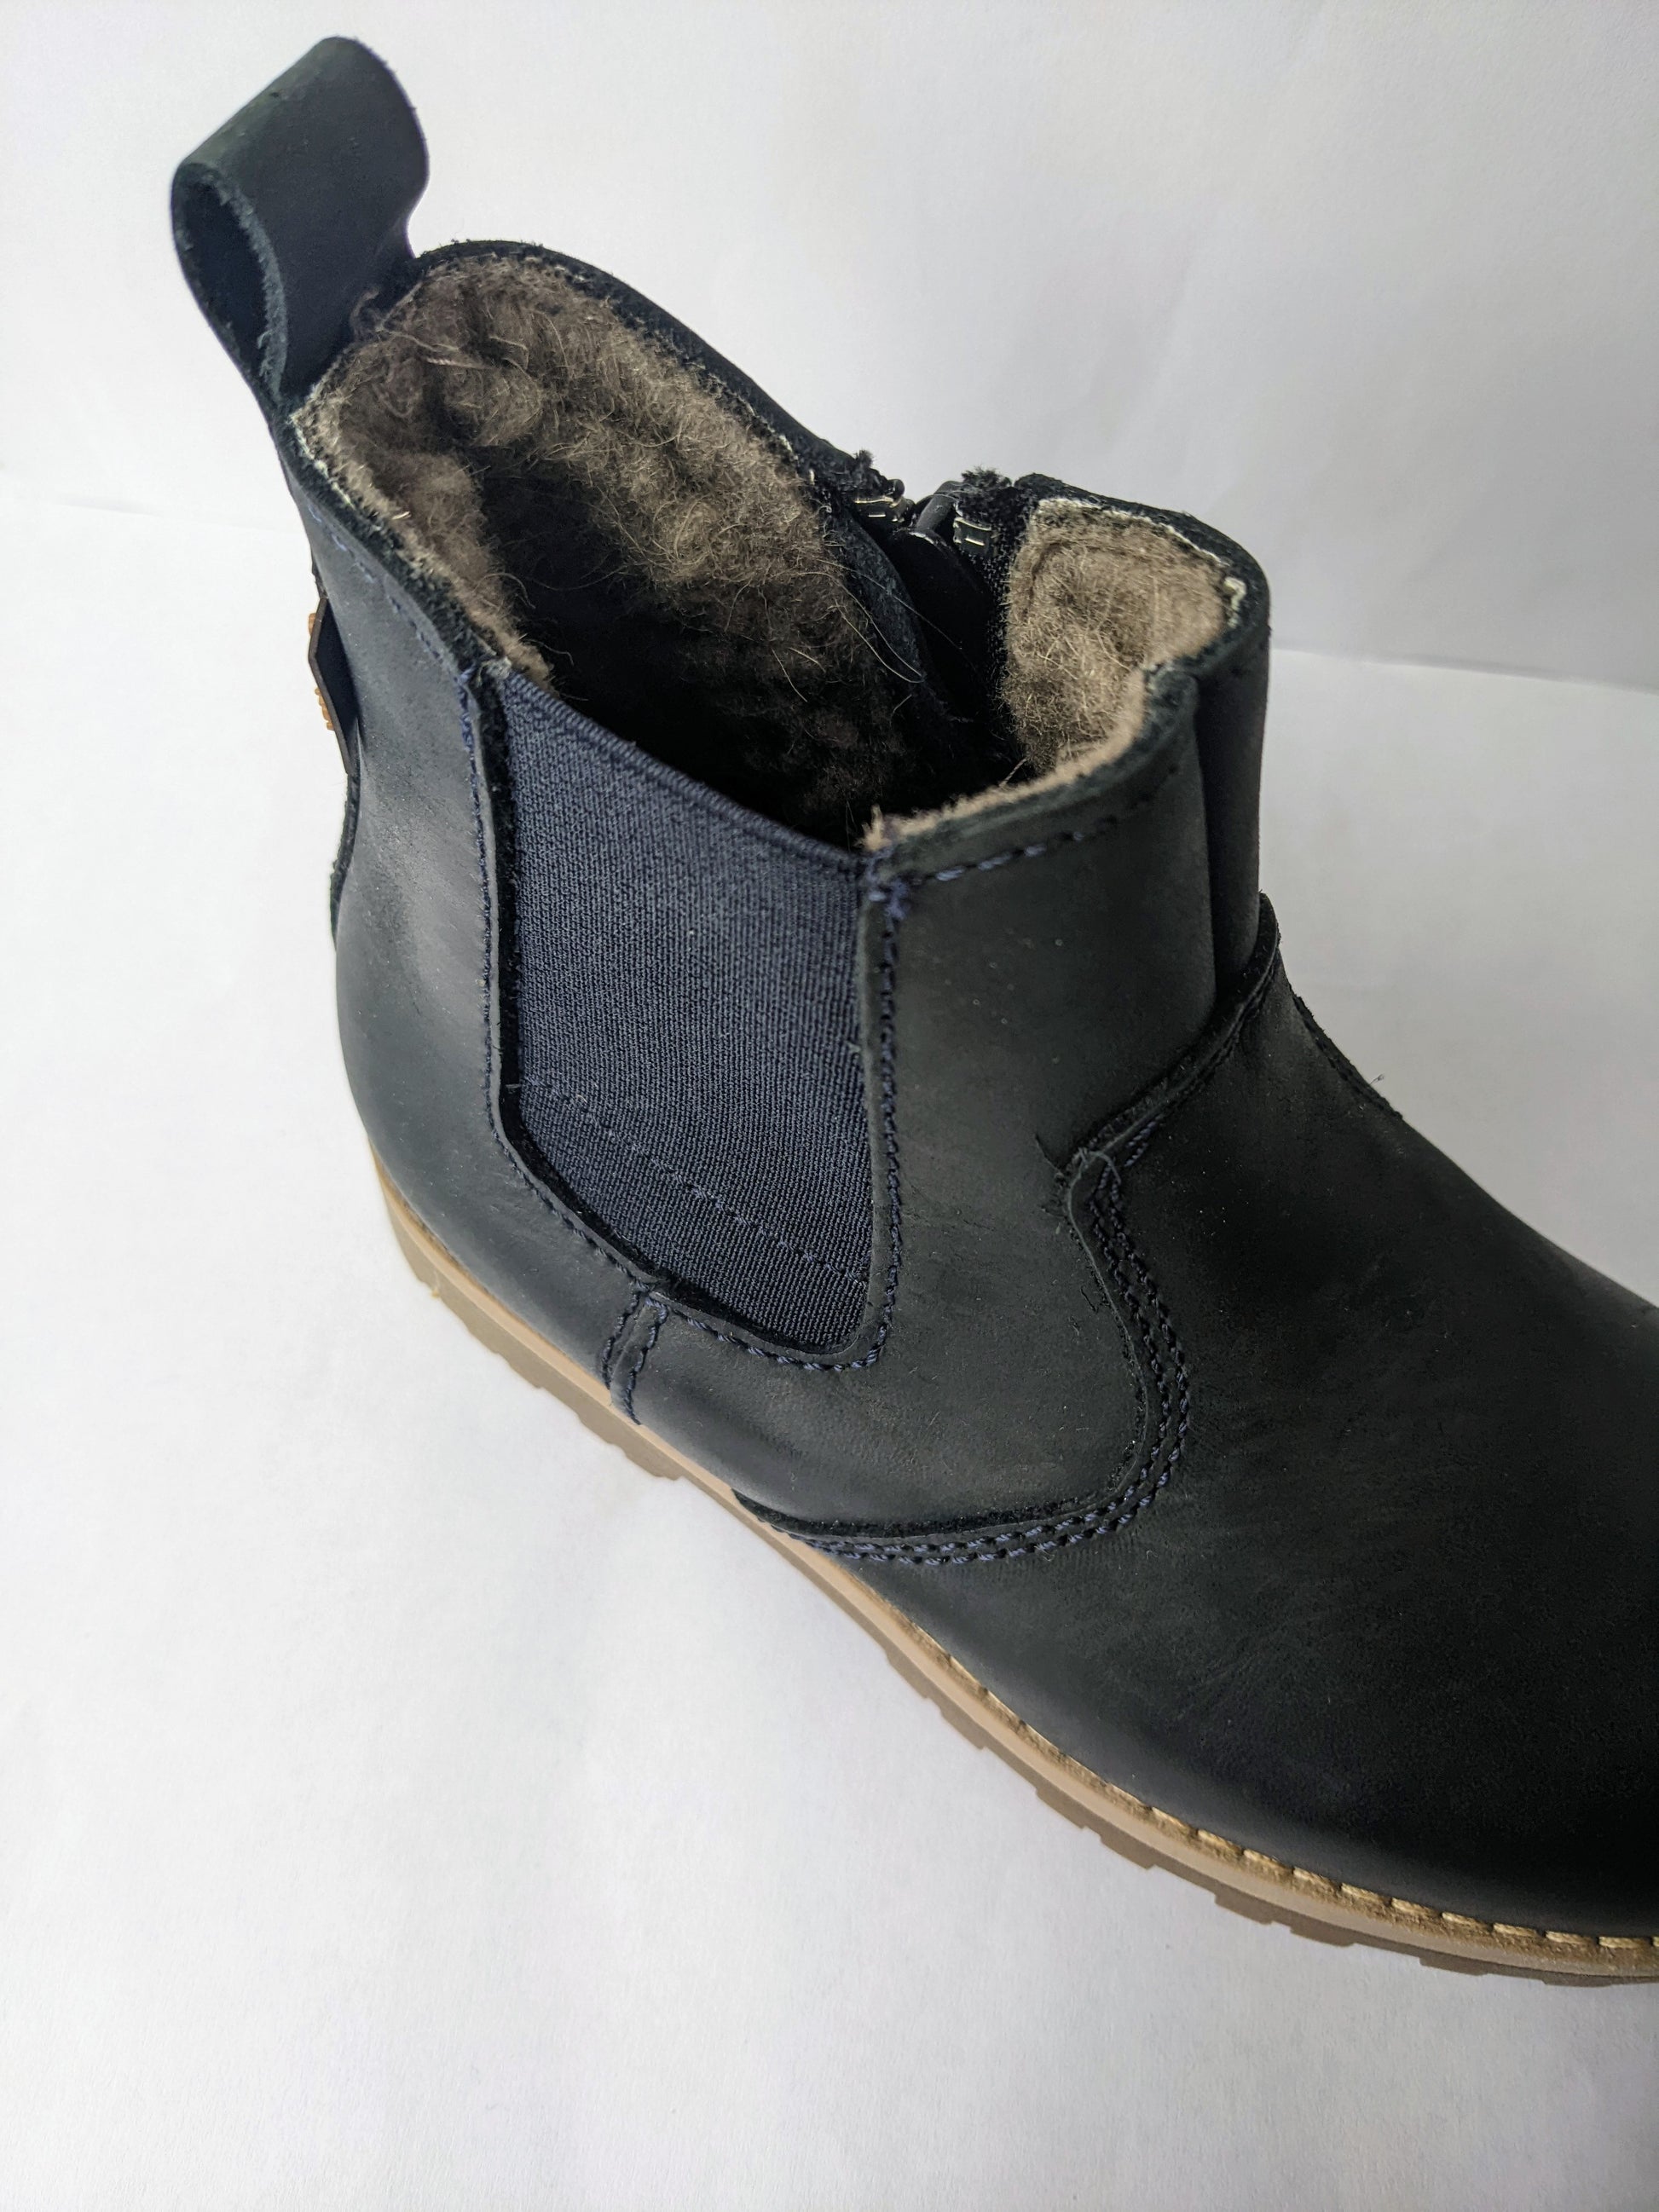 A fur lined unisex ankle boot by Froddo, style G3160111, in dark Blue nubuck with zip fastening. Above view of fur lining and right side